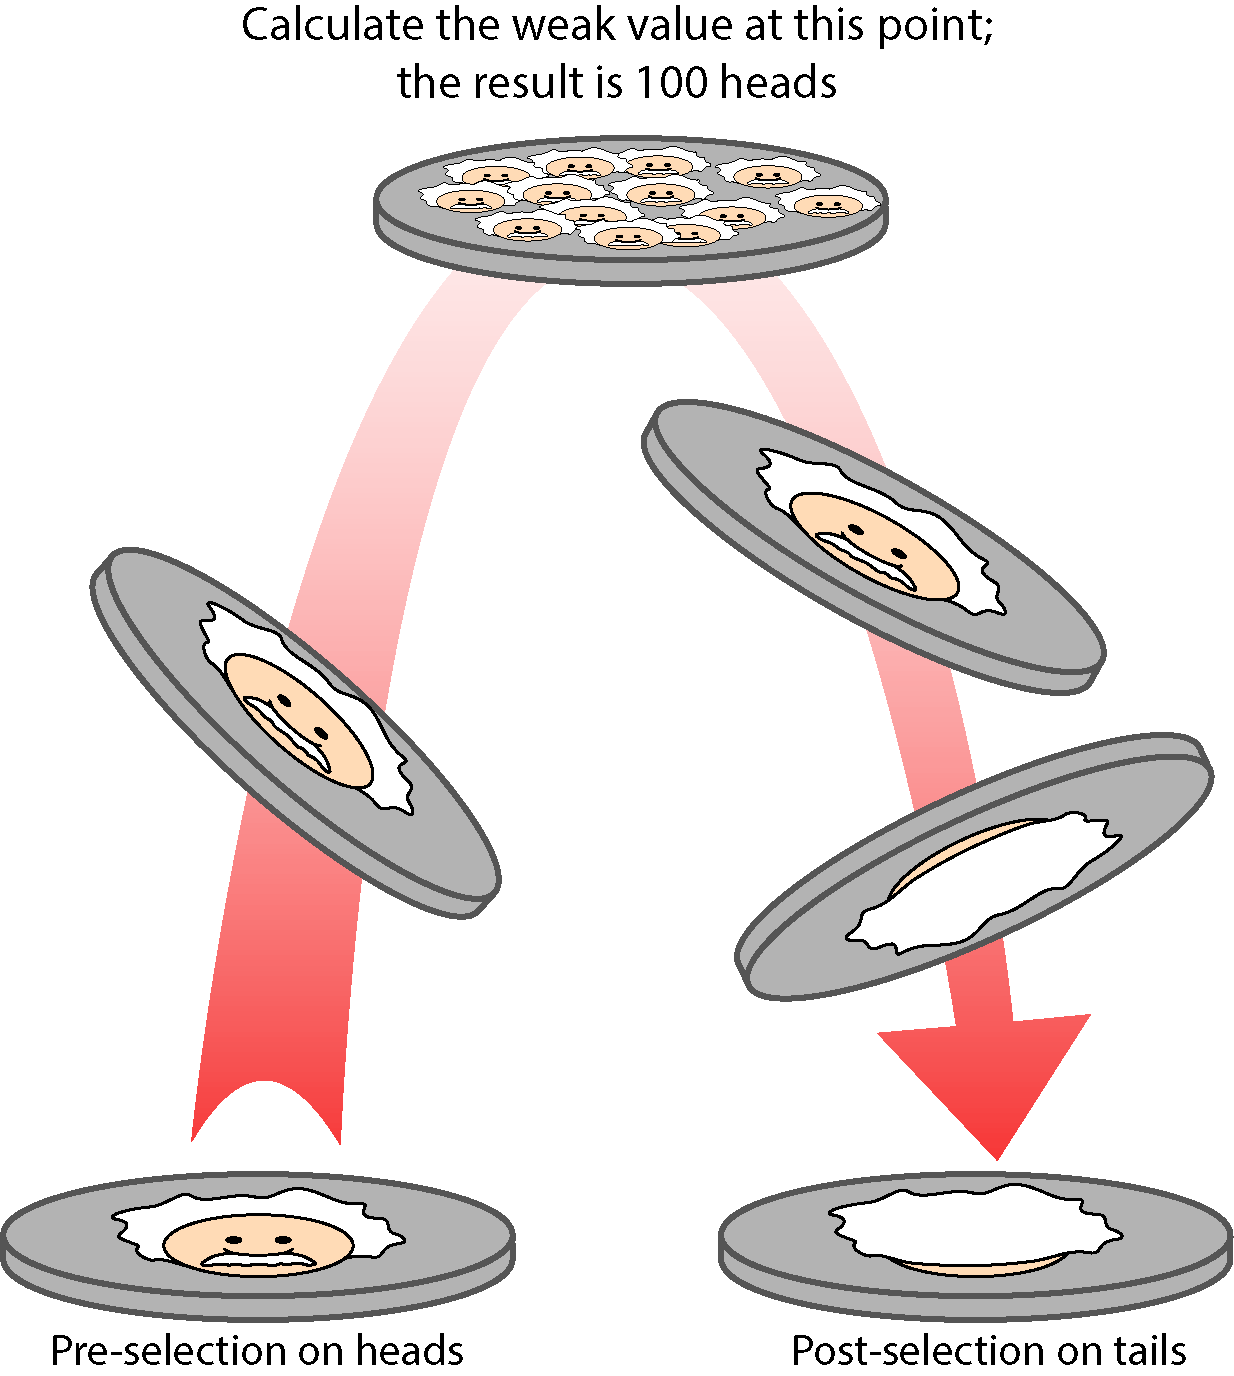 Diagram of pre-selection on heads and post-selection on tails of 100 flipped coins